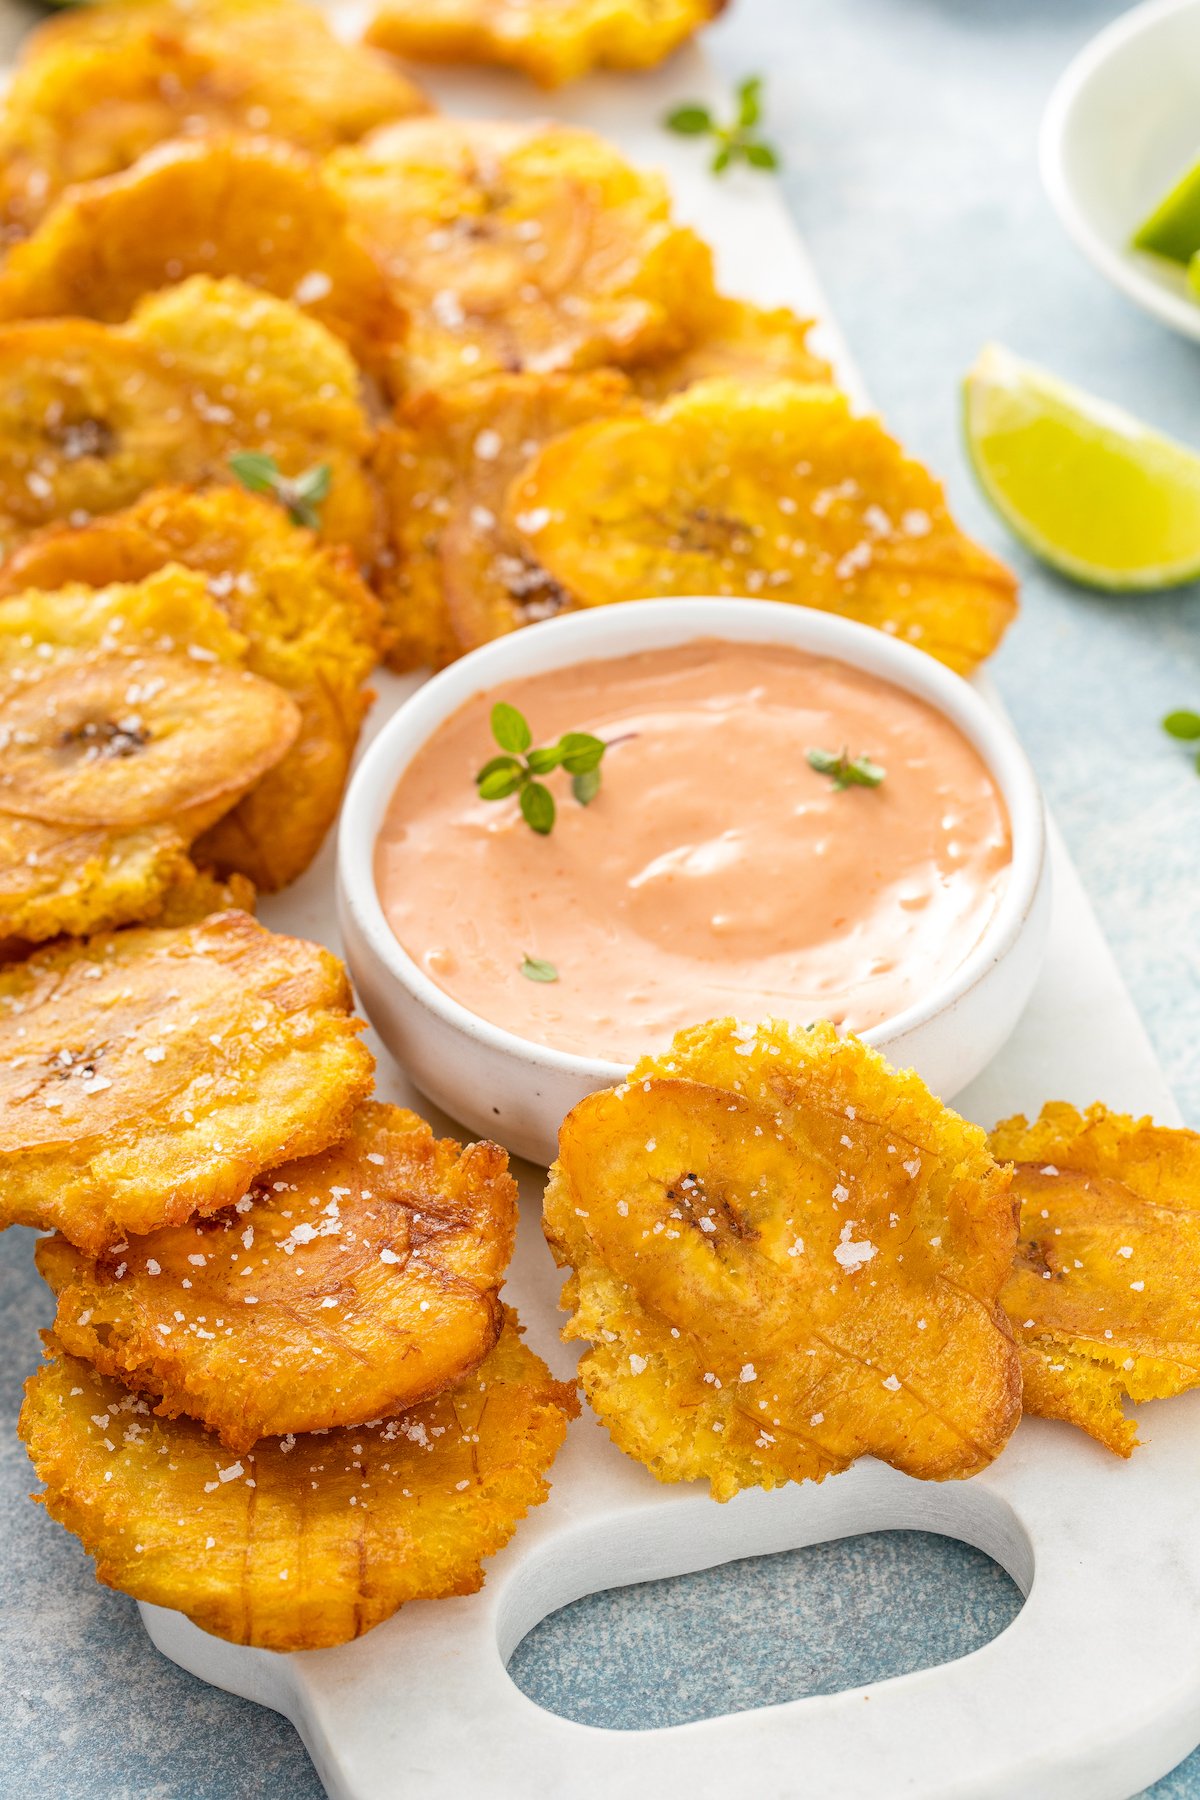 Fried plantains on a serving platter with salt on top with a bowl of mayo ketchup sauce for dipping.